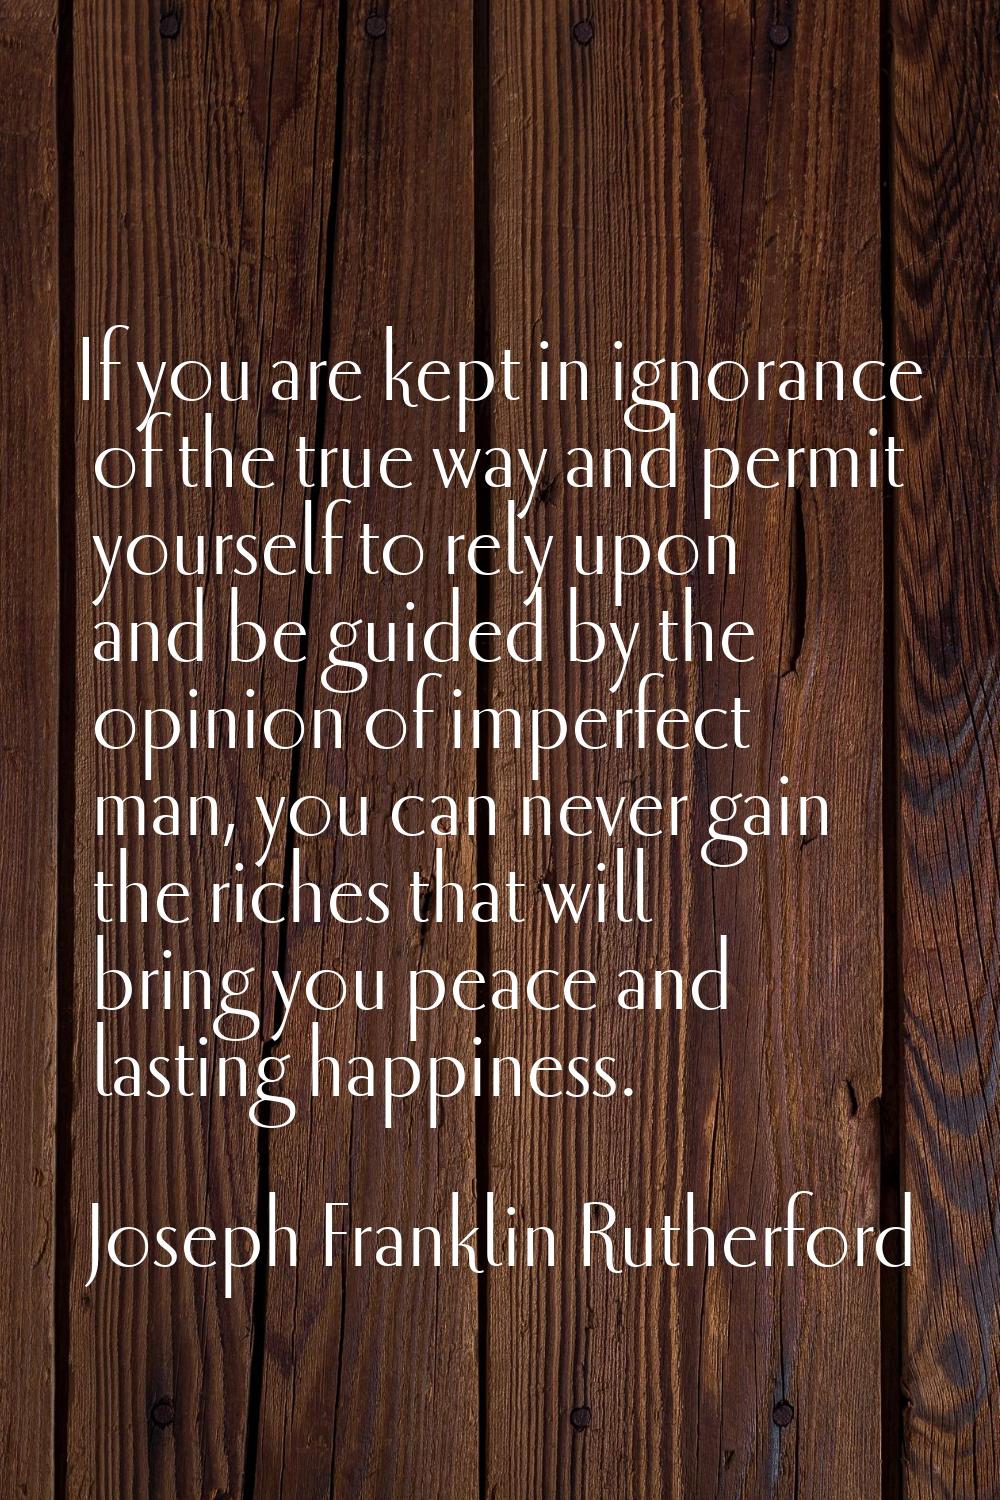 If you are kept in ignorance of the true way and permit yourself to rely upon and be guided by the 